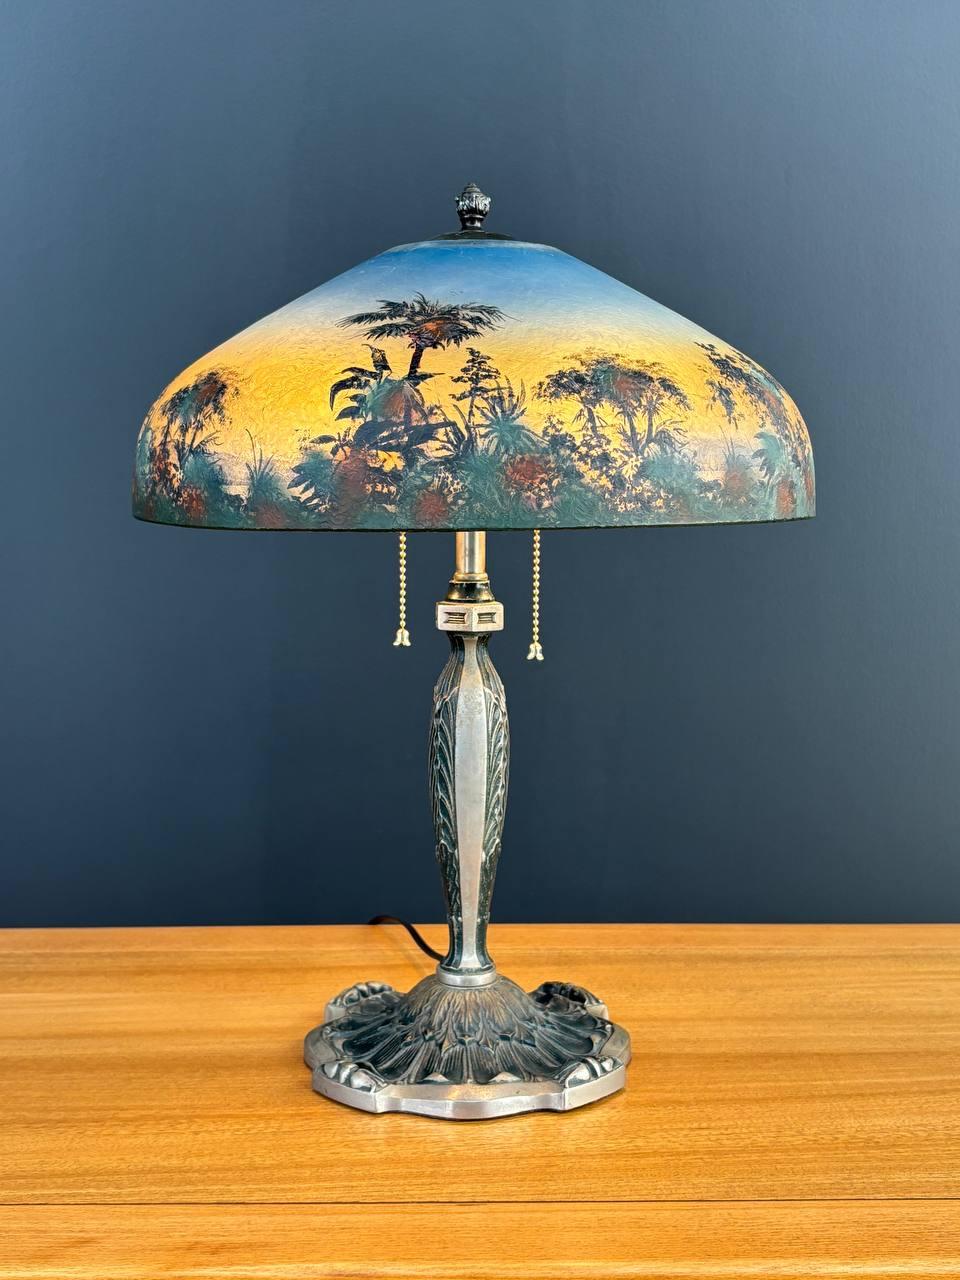 Materials: Patinated Steel, Reverse Painted Glass Shade
Style: Arts & Craft